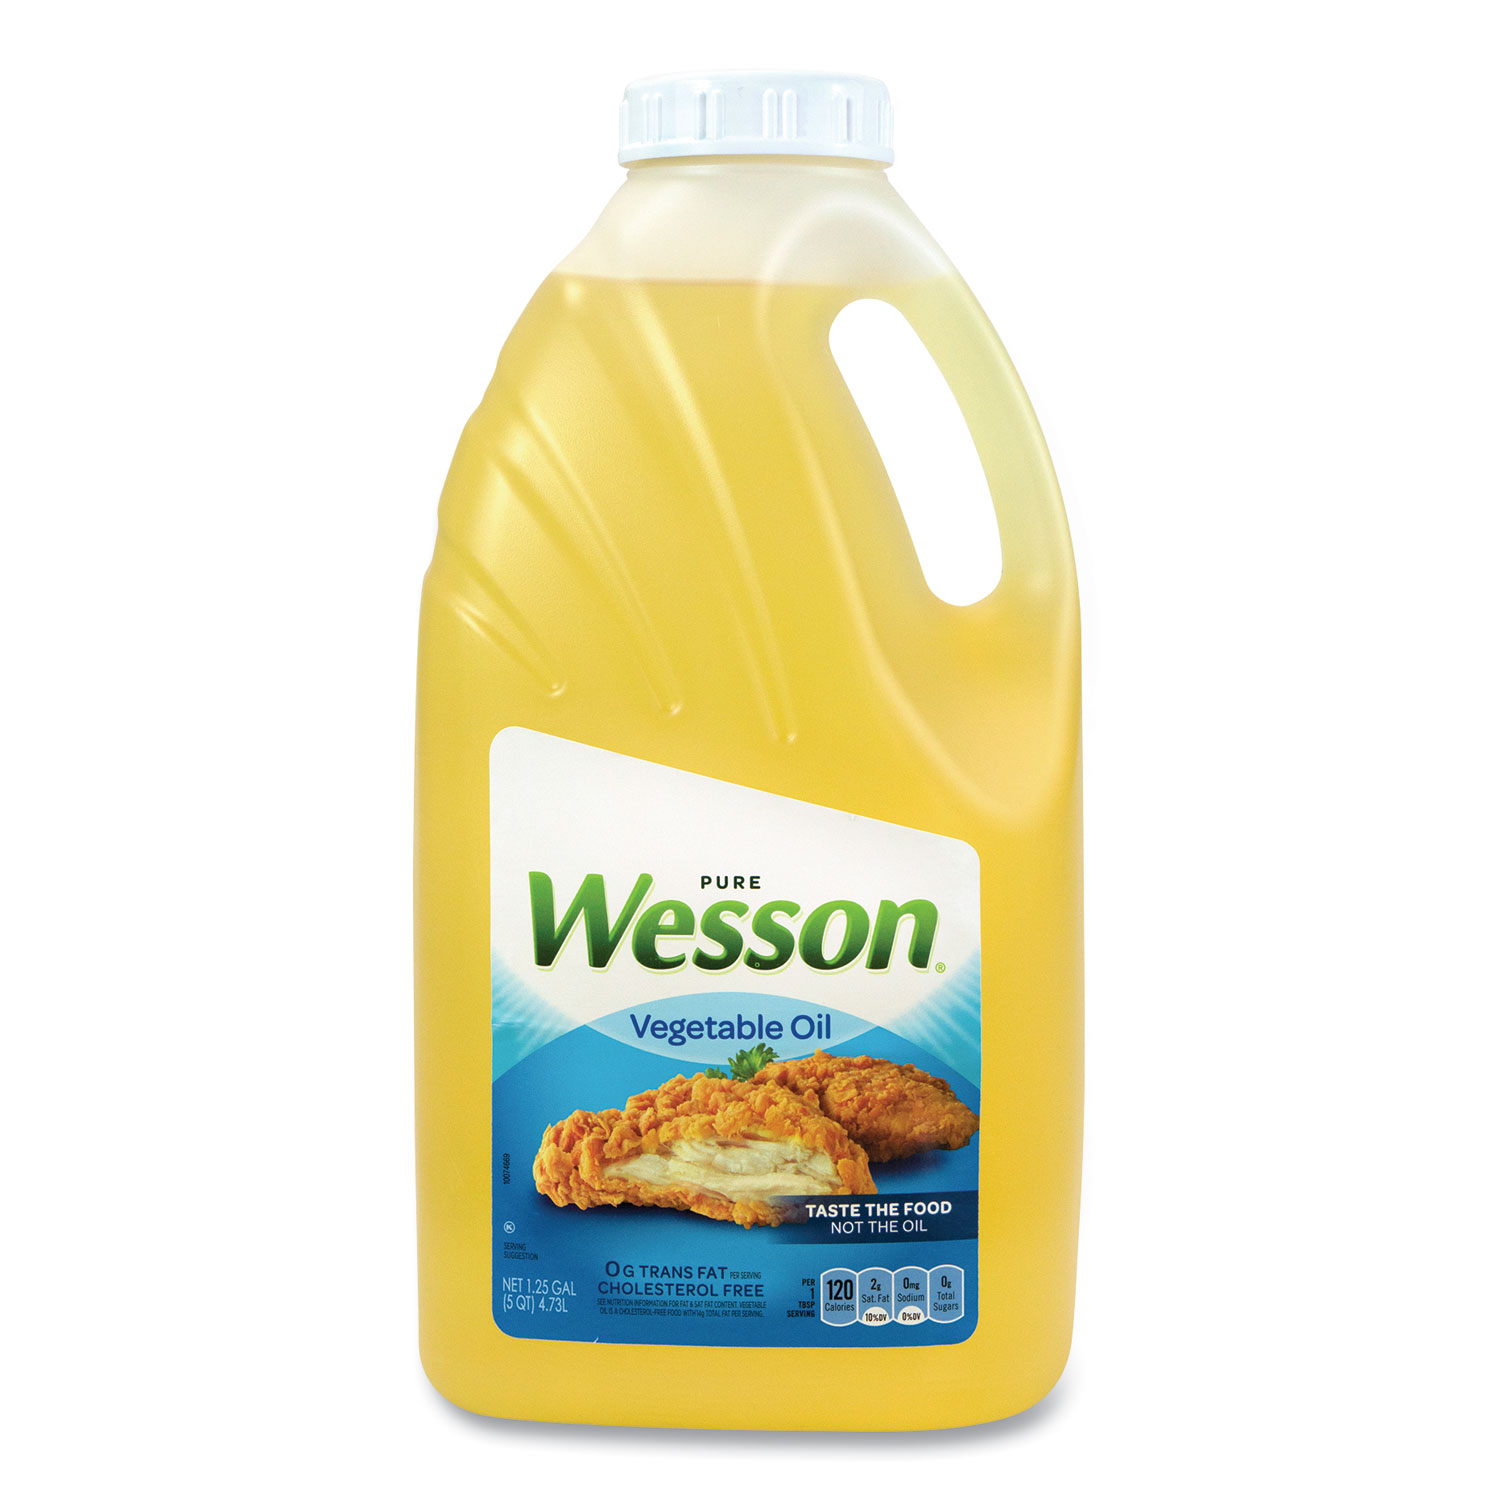 Pure Wesson® Vegetable Oil, 1.25 gal Bottle, Free Delivery in 1-4 Business Days